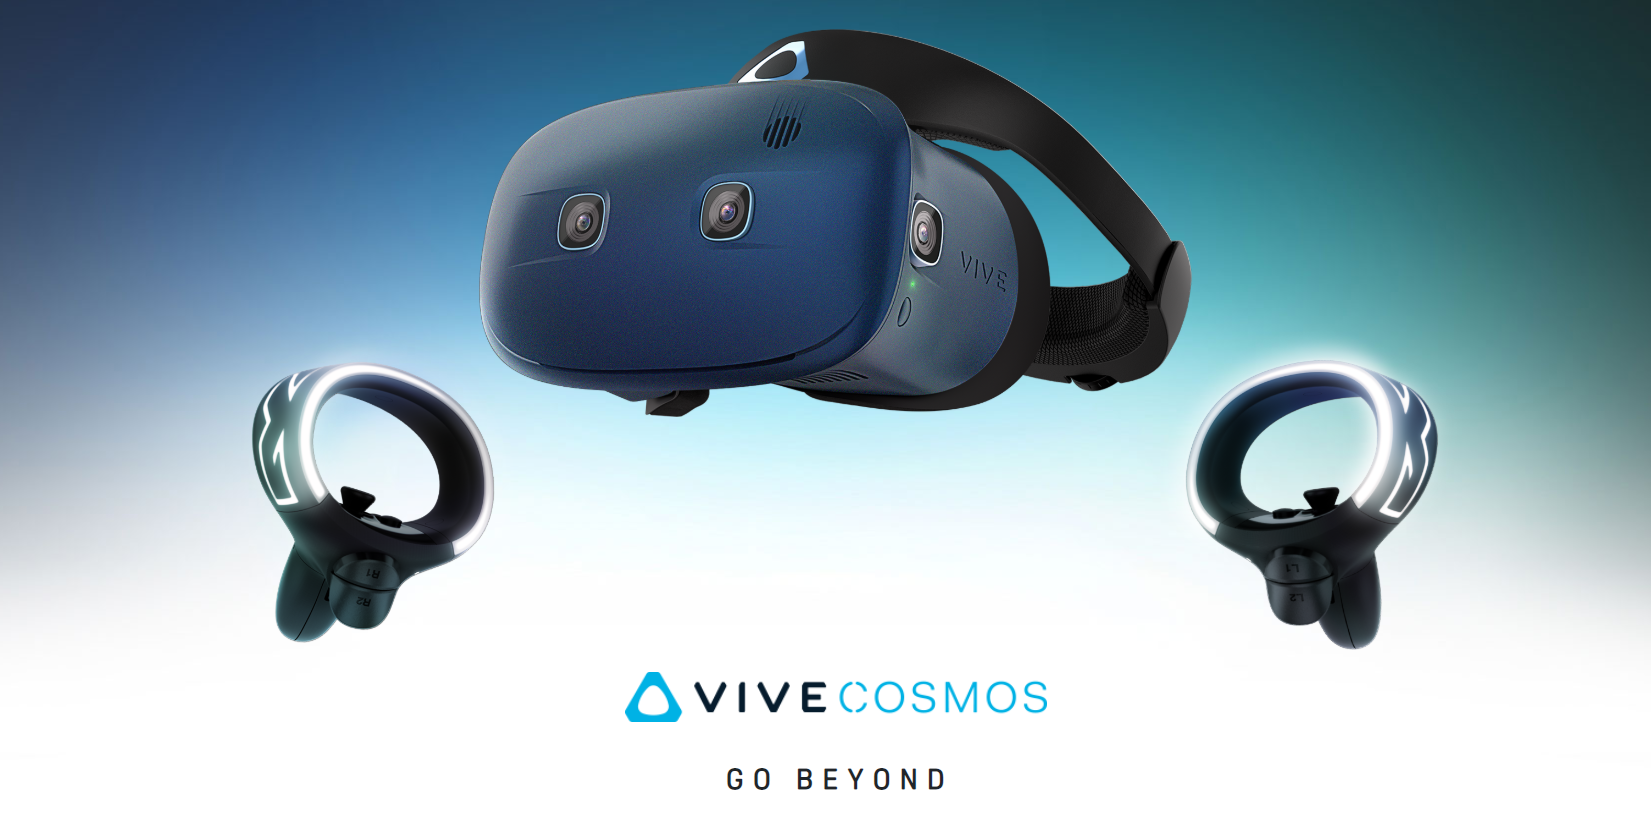 Vive Cosmos controllers inside-out tracking VR headset